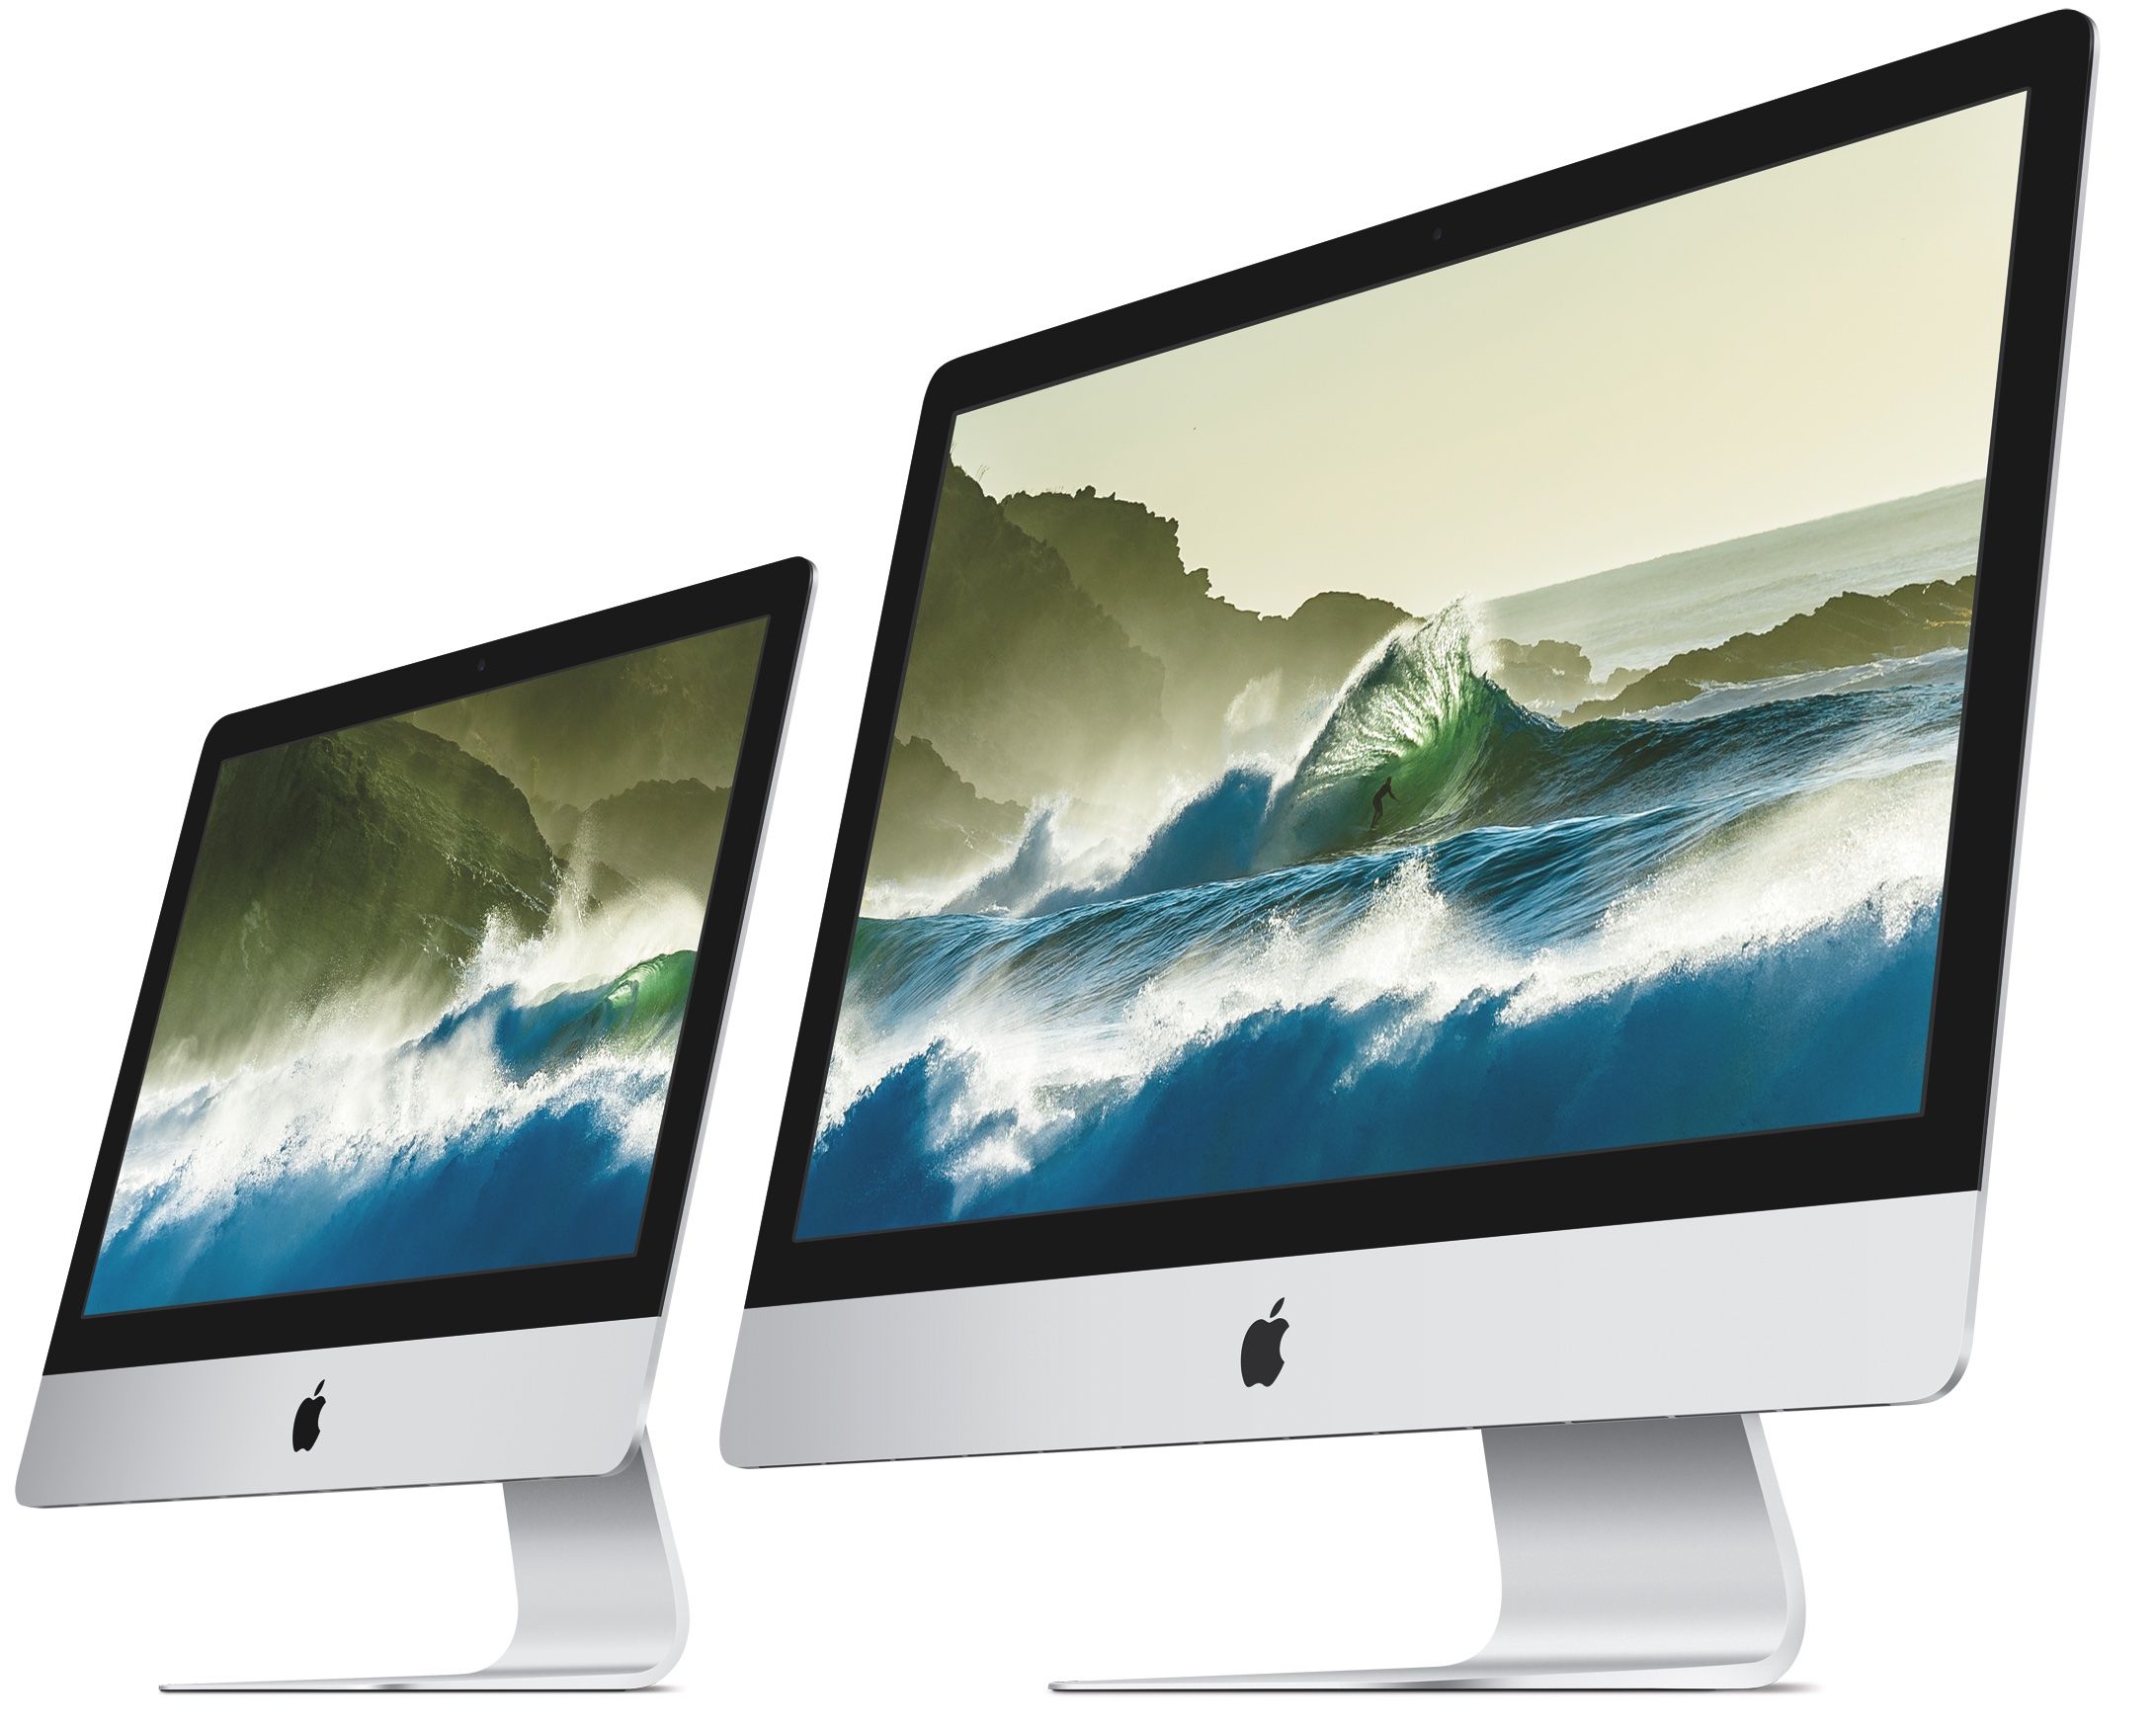 Where can I find the iMac 2015 wallpapers? : apple